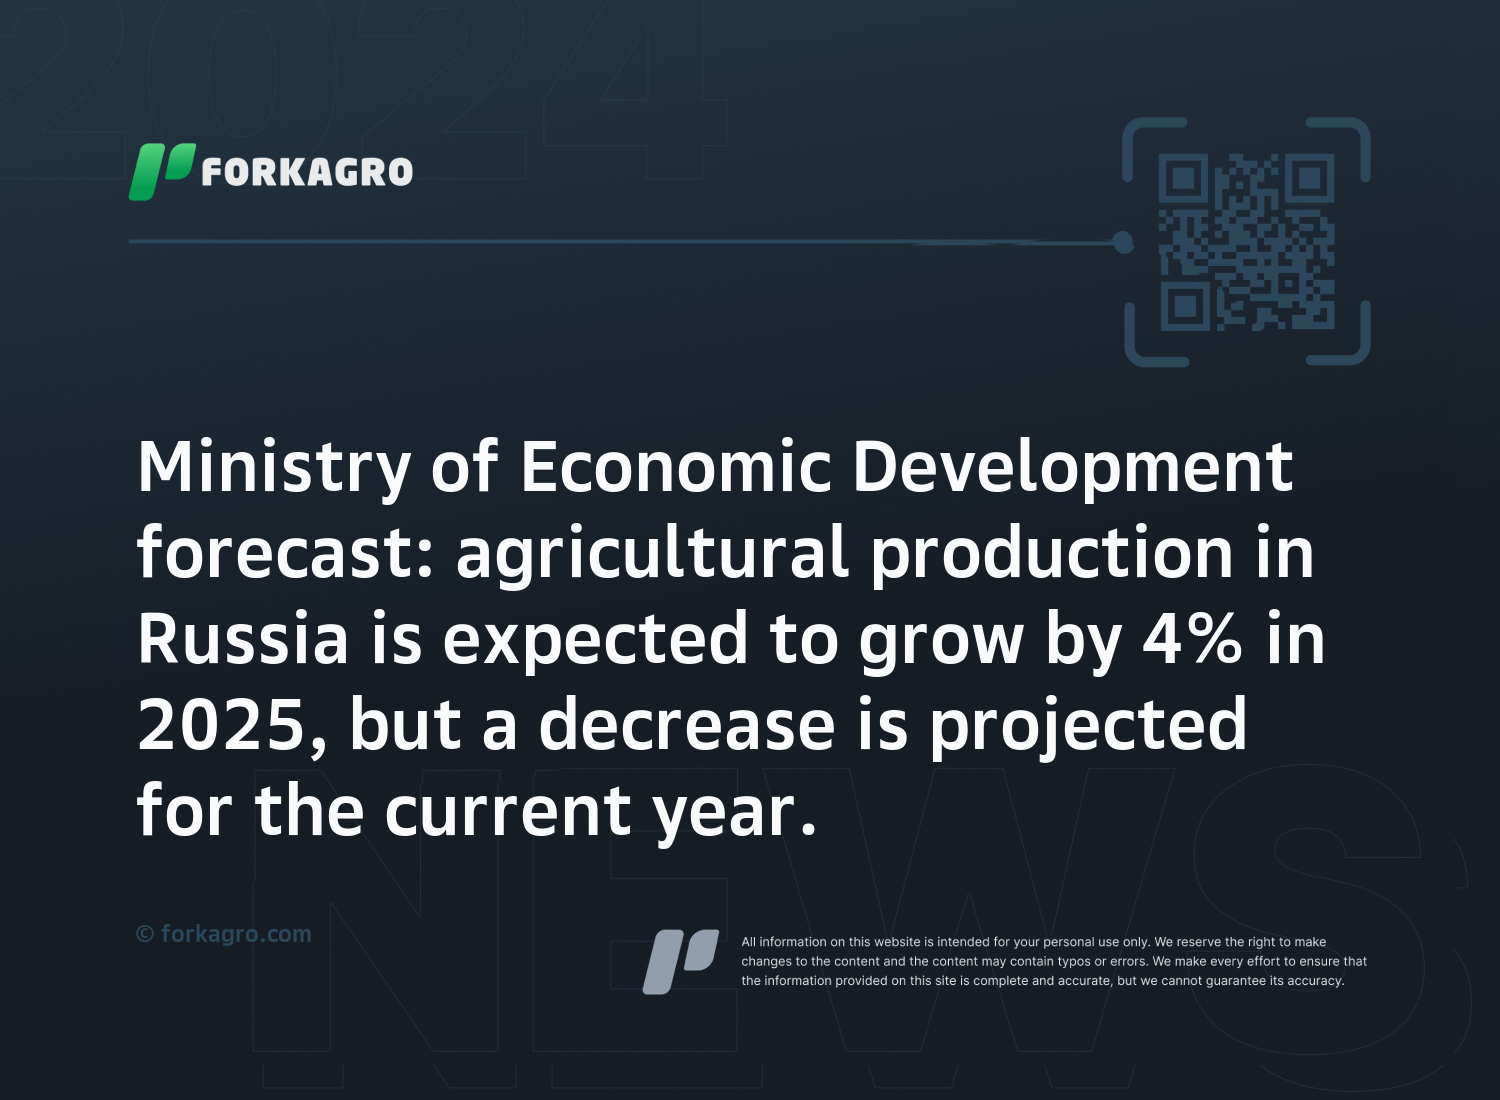 Ministry of Economic Development forecast: agricultural production in Russia is expected to grow by 4% in 2025, but a decrease is projected for the current year.